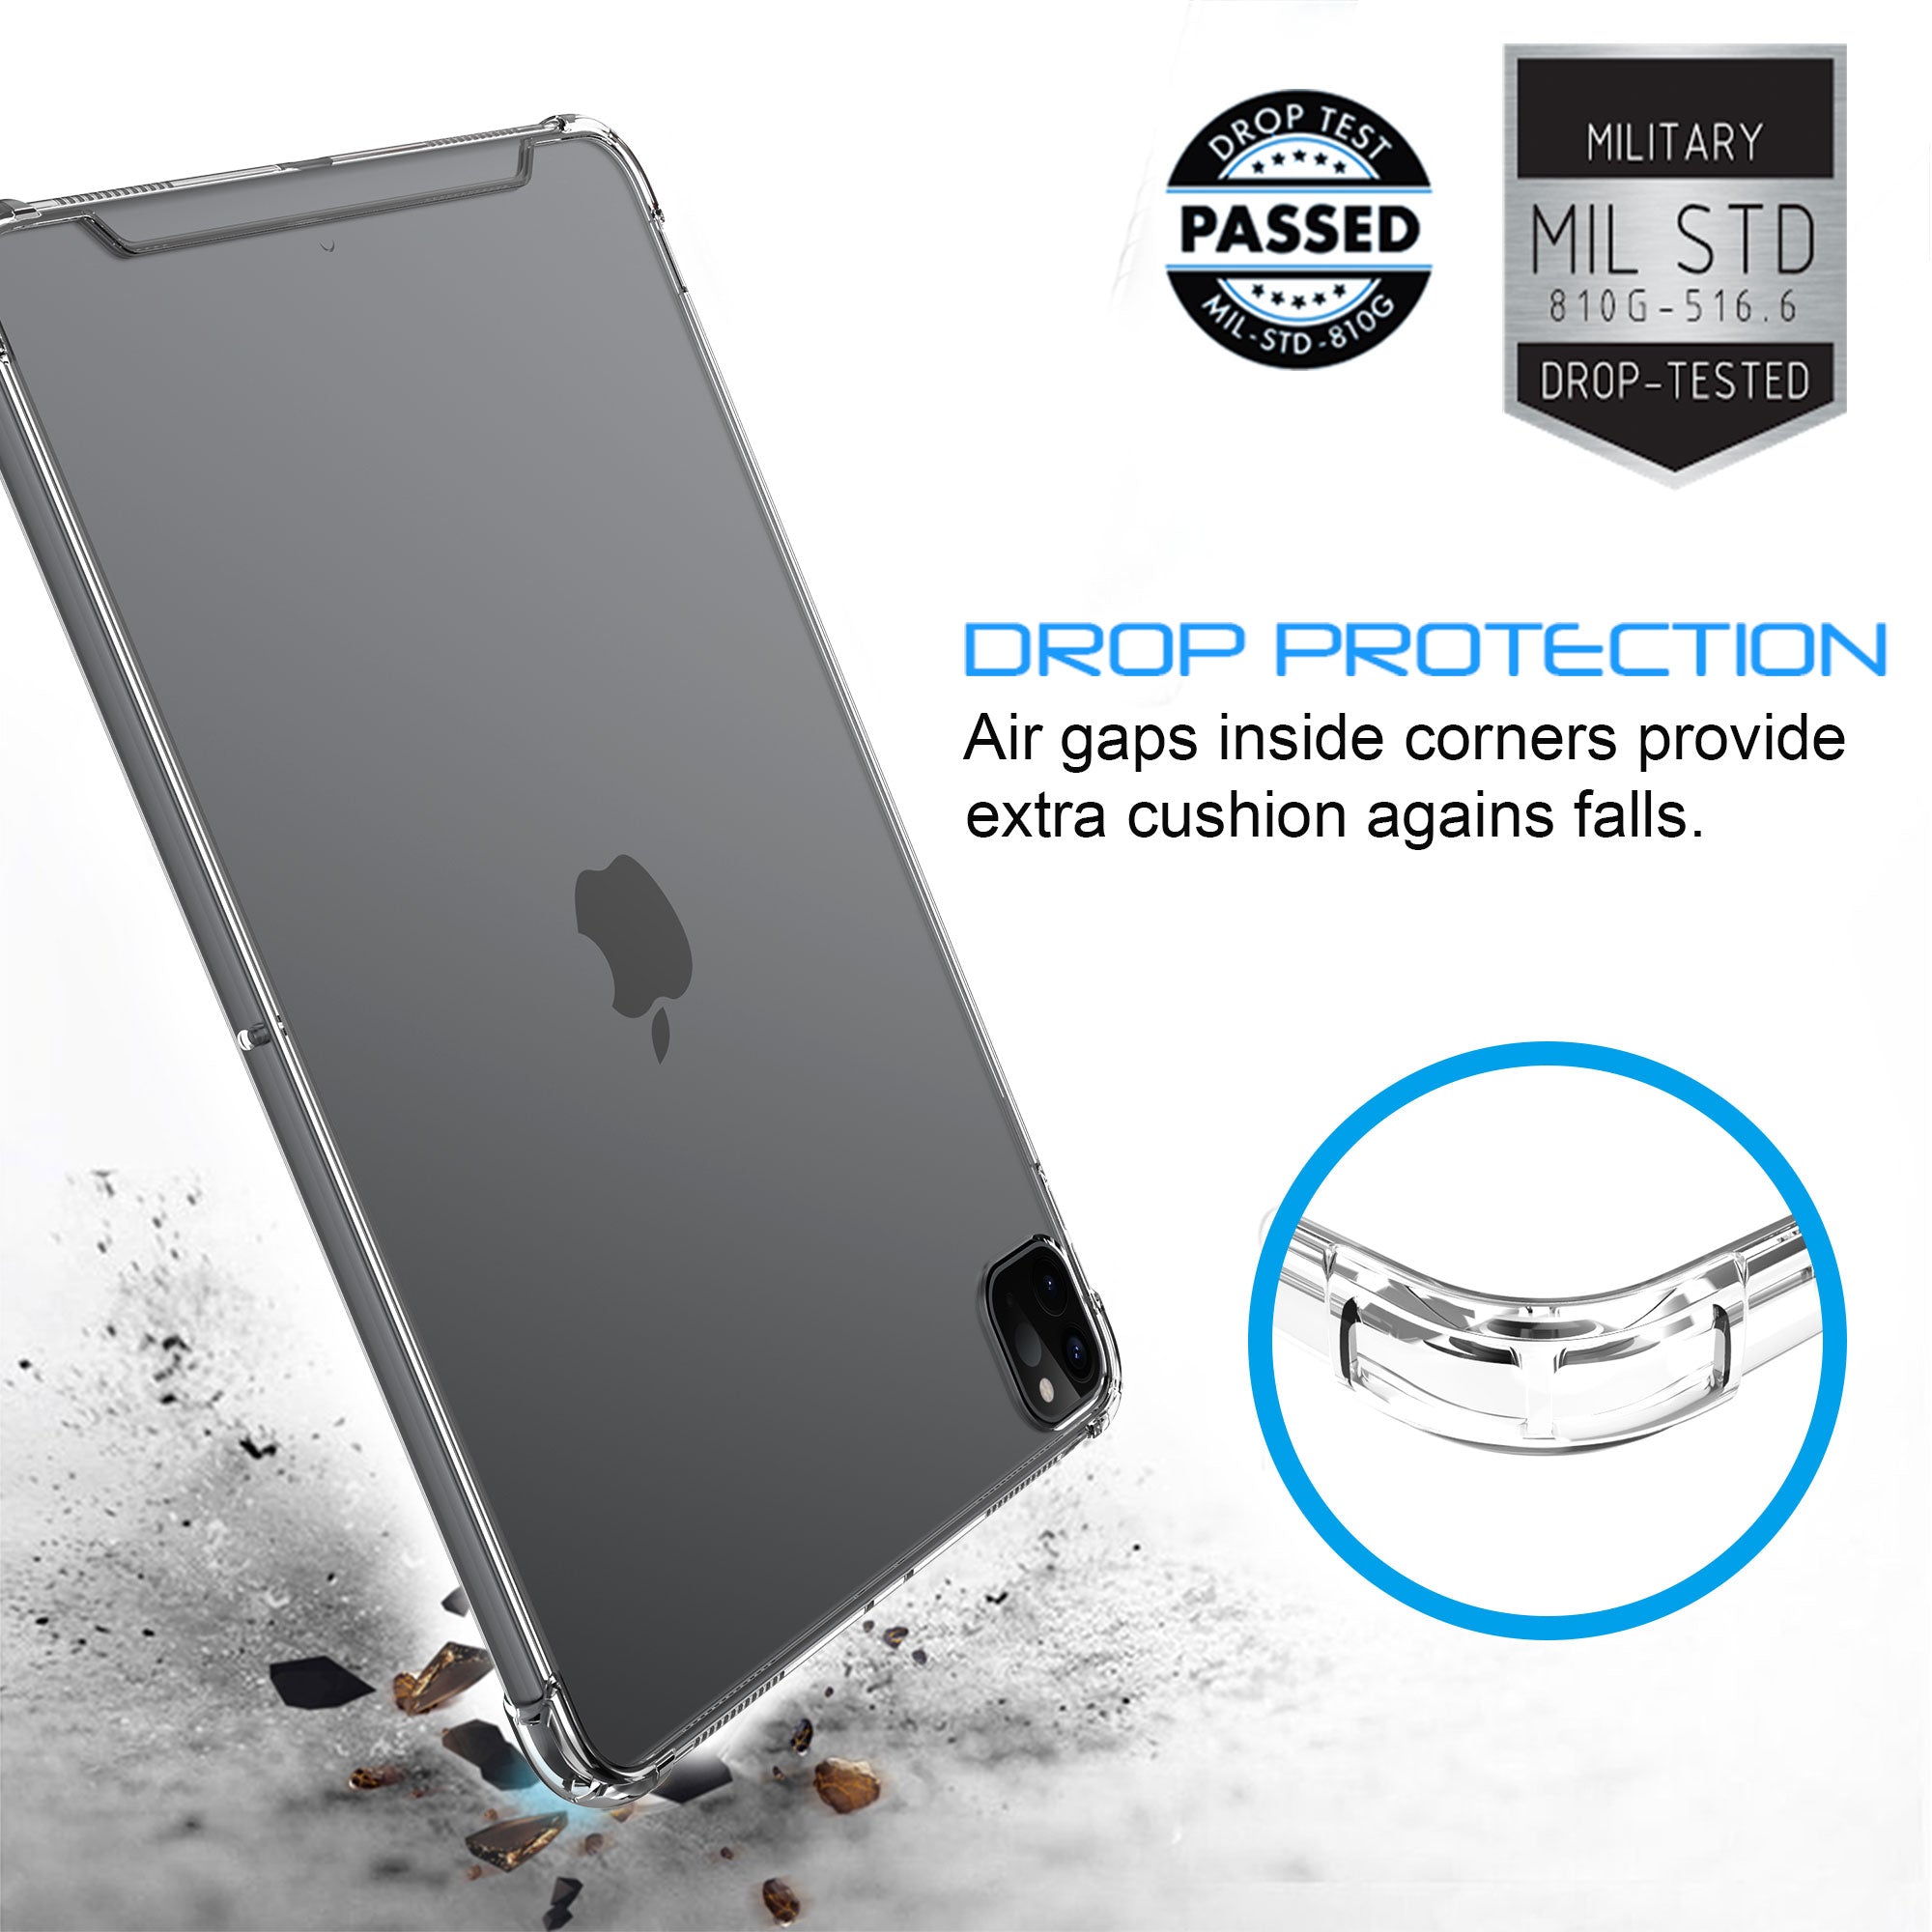 Luvvitt Case and Liquid Glass Screen Protector for iPad Pro 12.9 2020 - Clear